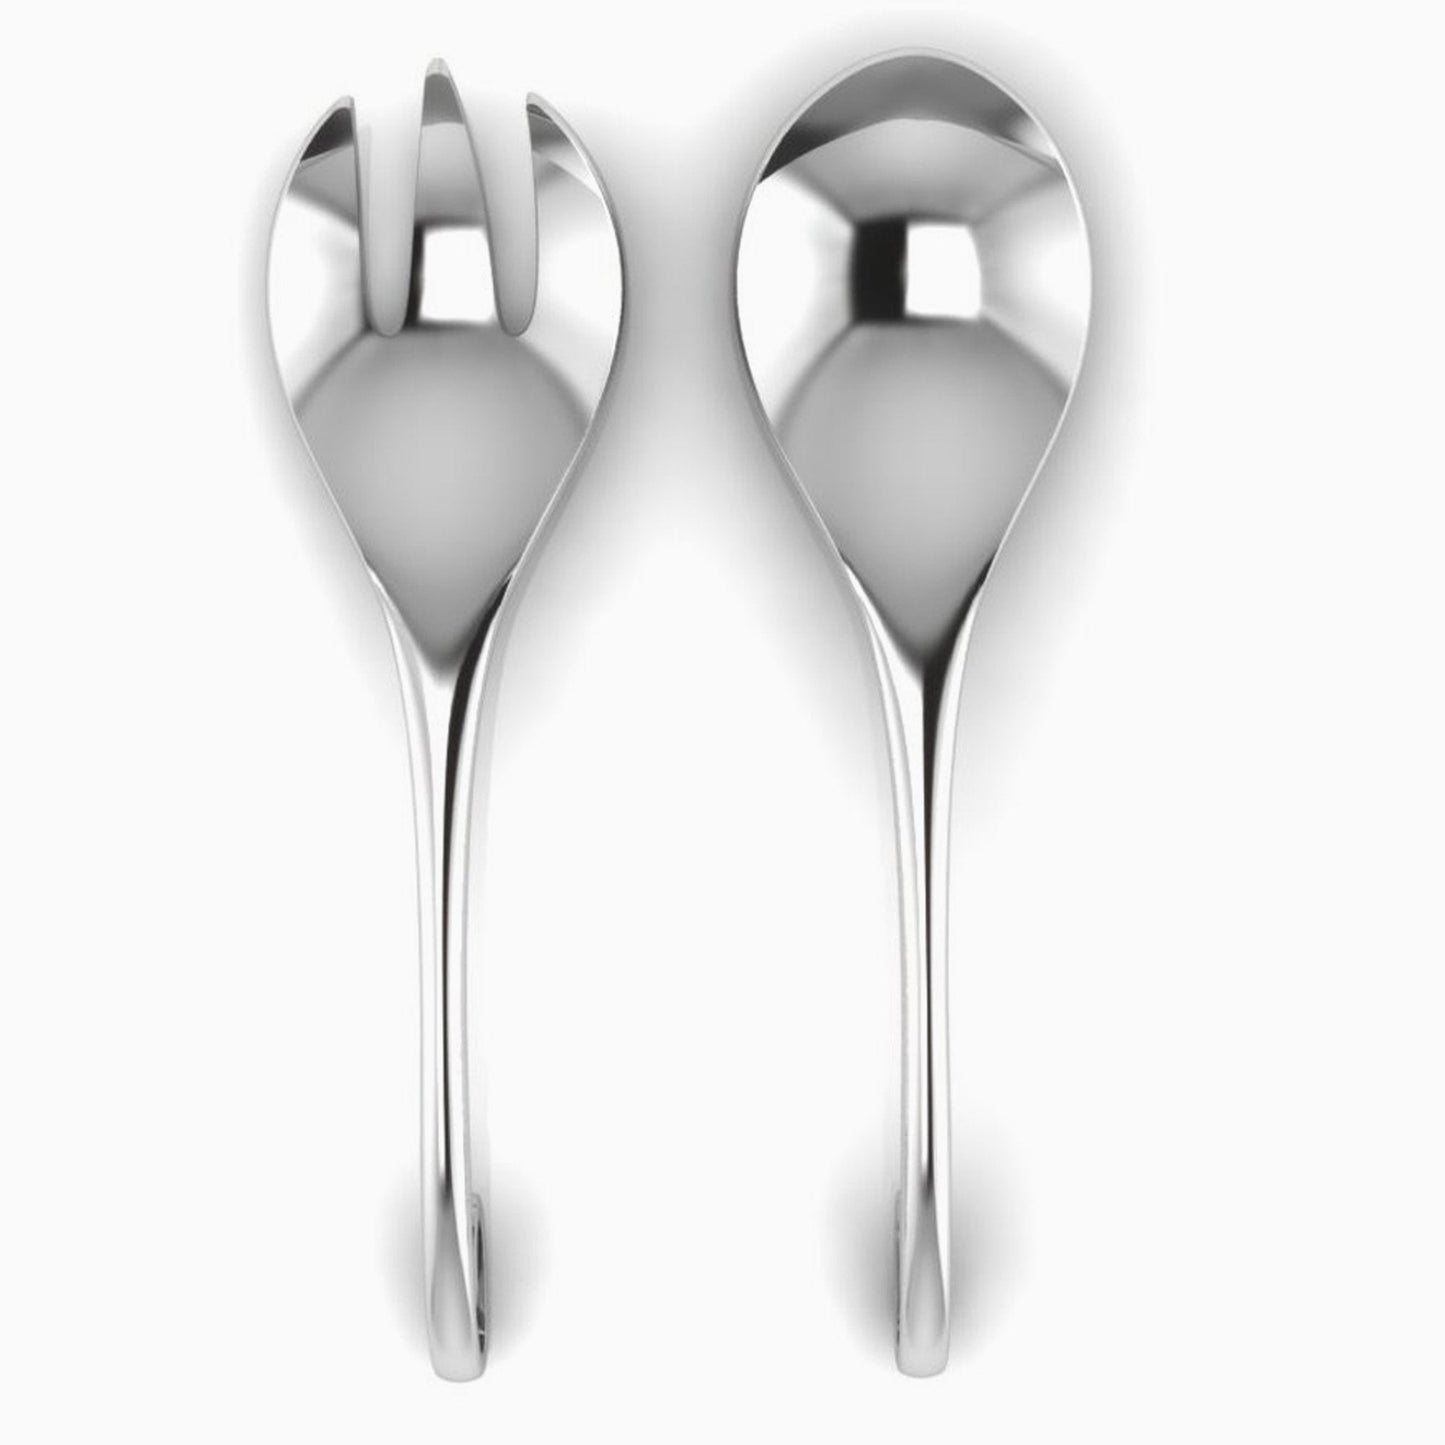 Curve Sterling Silver Baby Spoon and Fork Set By Krysaliis